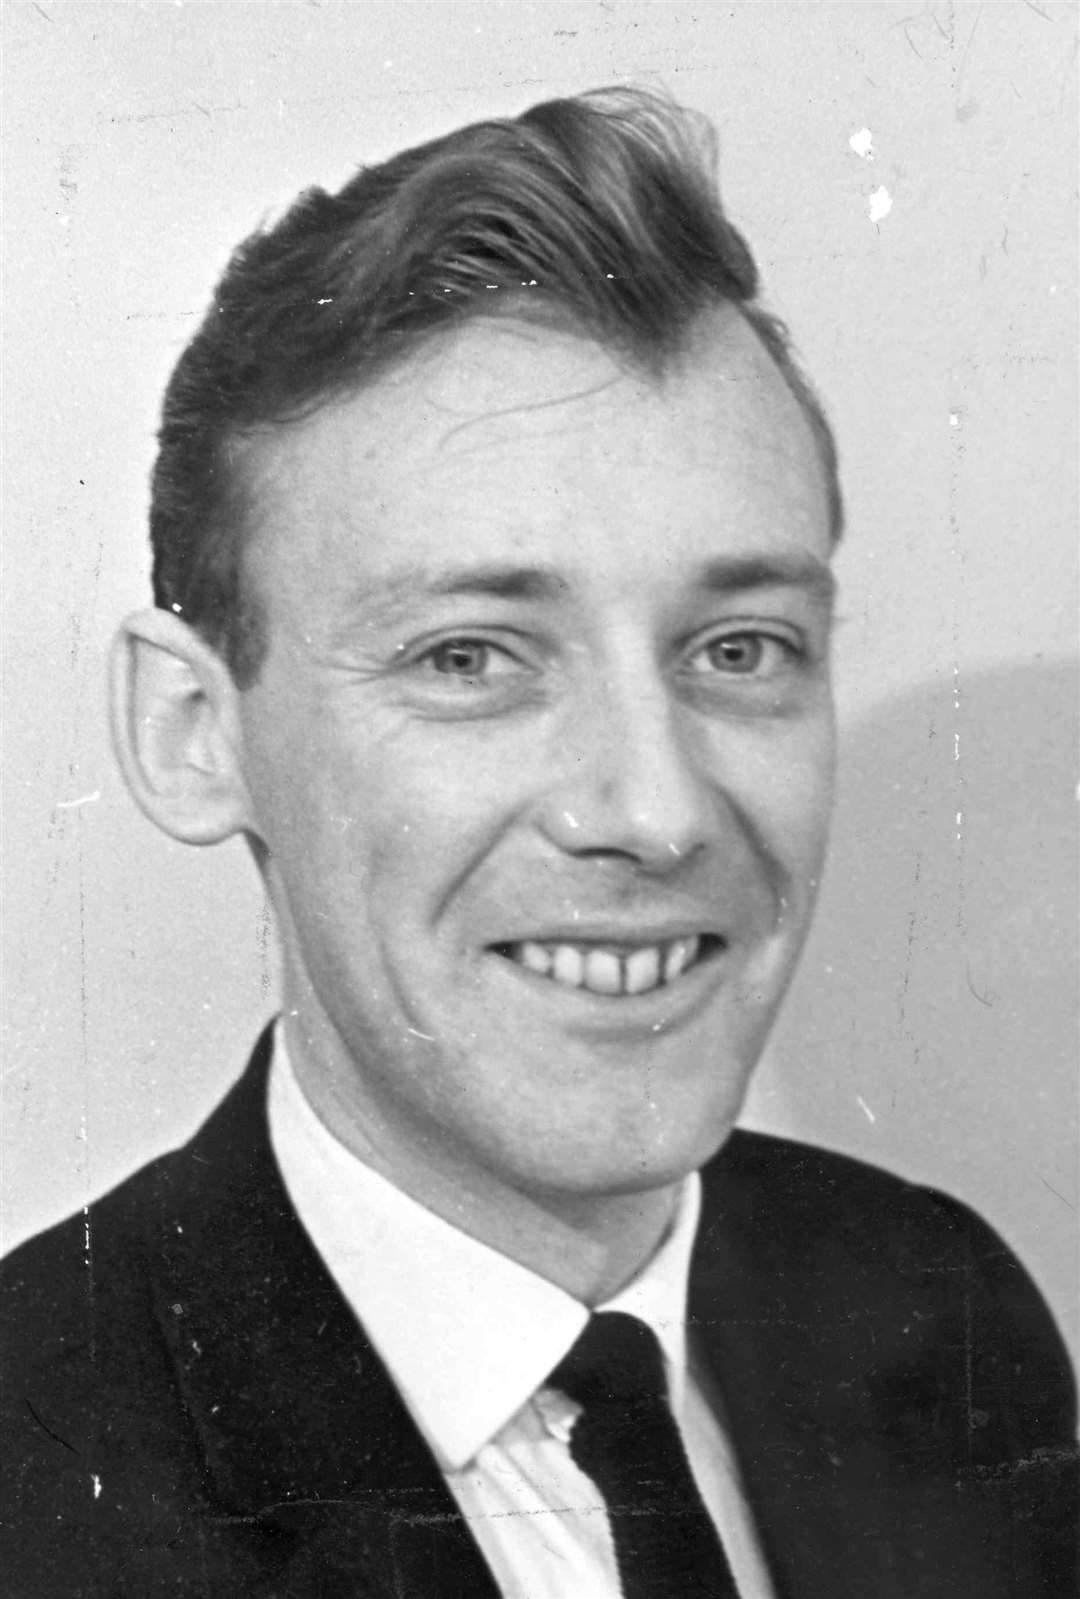 Norman Smith at the time he moved to Kent and joined the company in October 1968